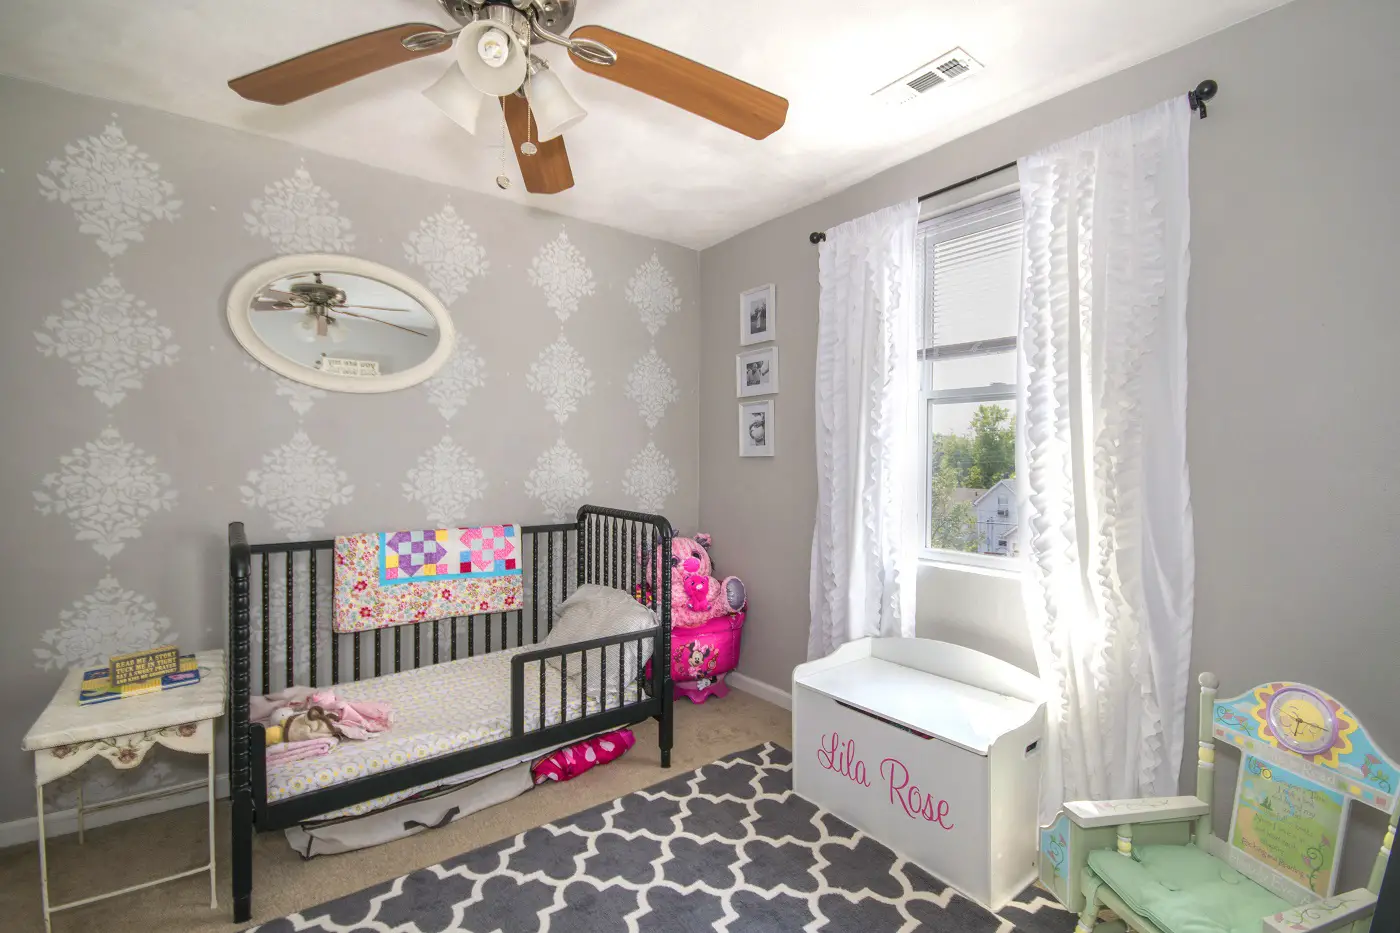 An in-depth review of the best crib bedding sets available in 2019.